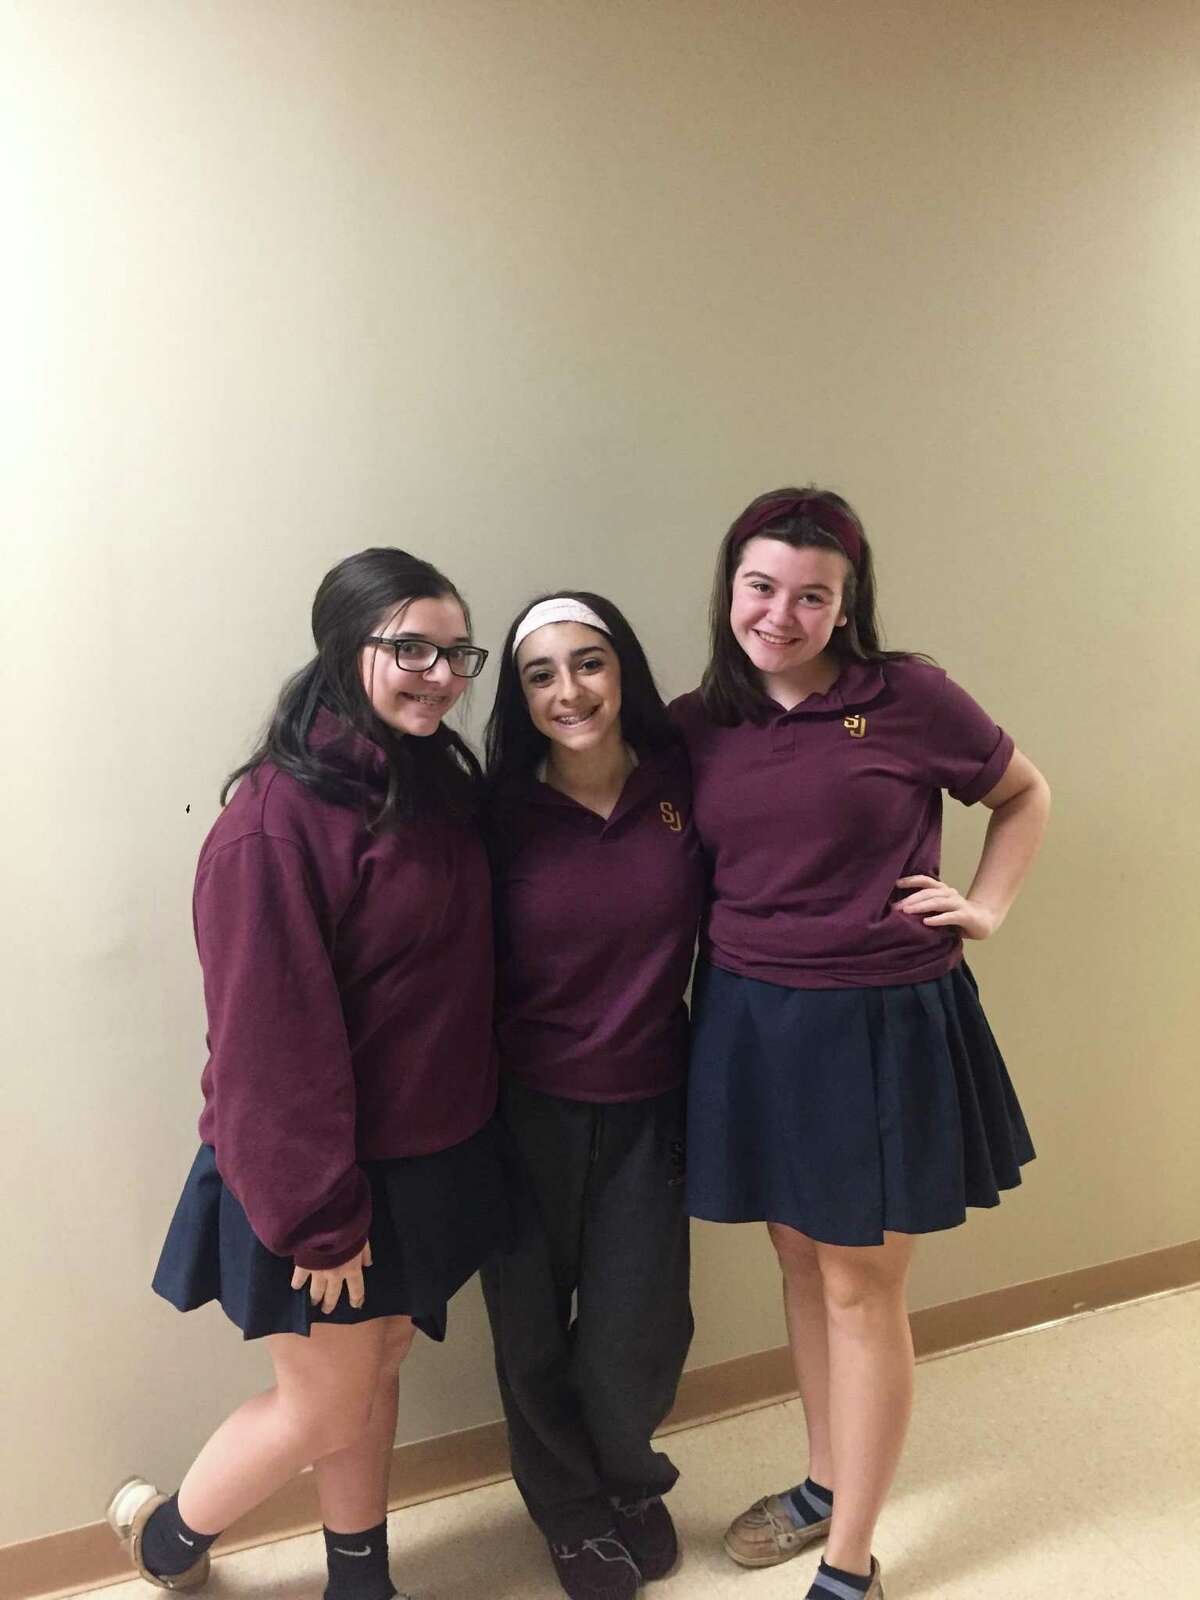 Shelton residents, left to right, Hailey McKeon (Bernardo, Messenger, Player Queen), Morgan DeAngelo (Gravedigger, Fortinbras’ Captain, Gentlewoman), and Kelly McSheery (Guildenstern) are featured in the St. Joseph High School Drama Club’s production of Shakespeare’s Hamlet.